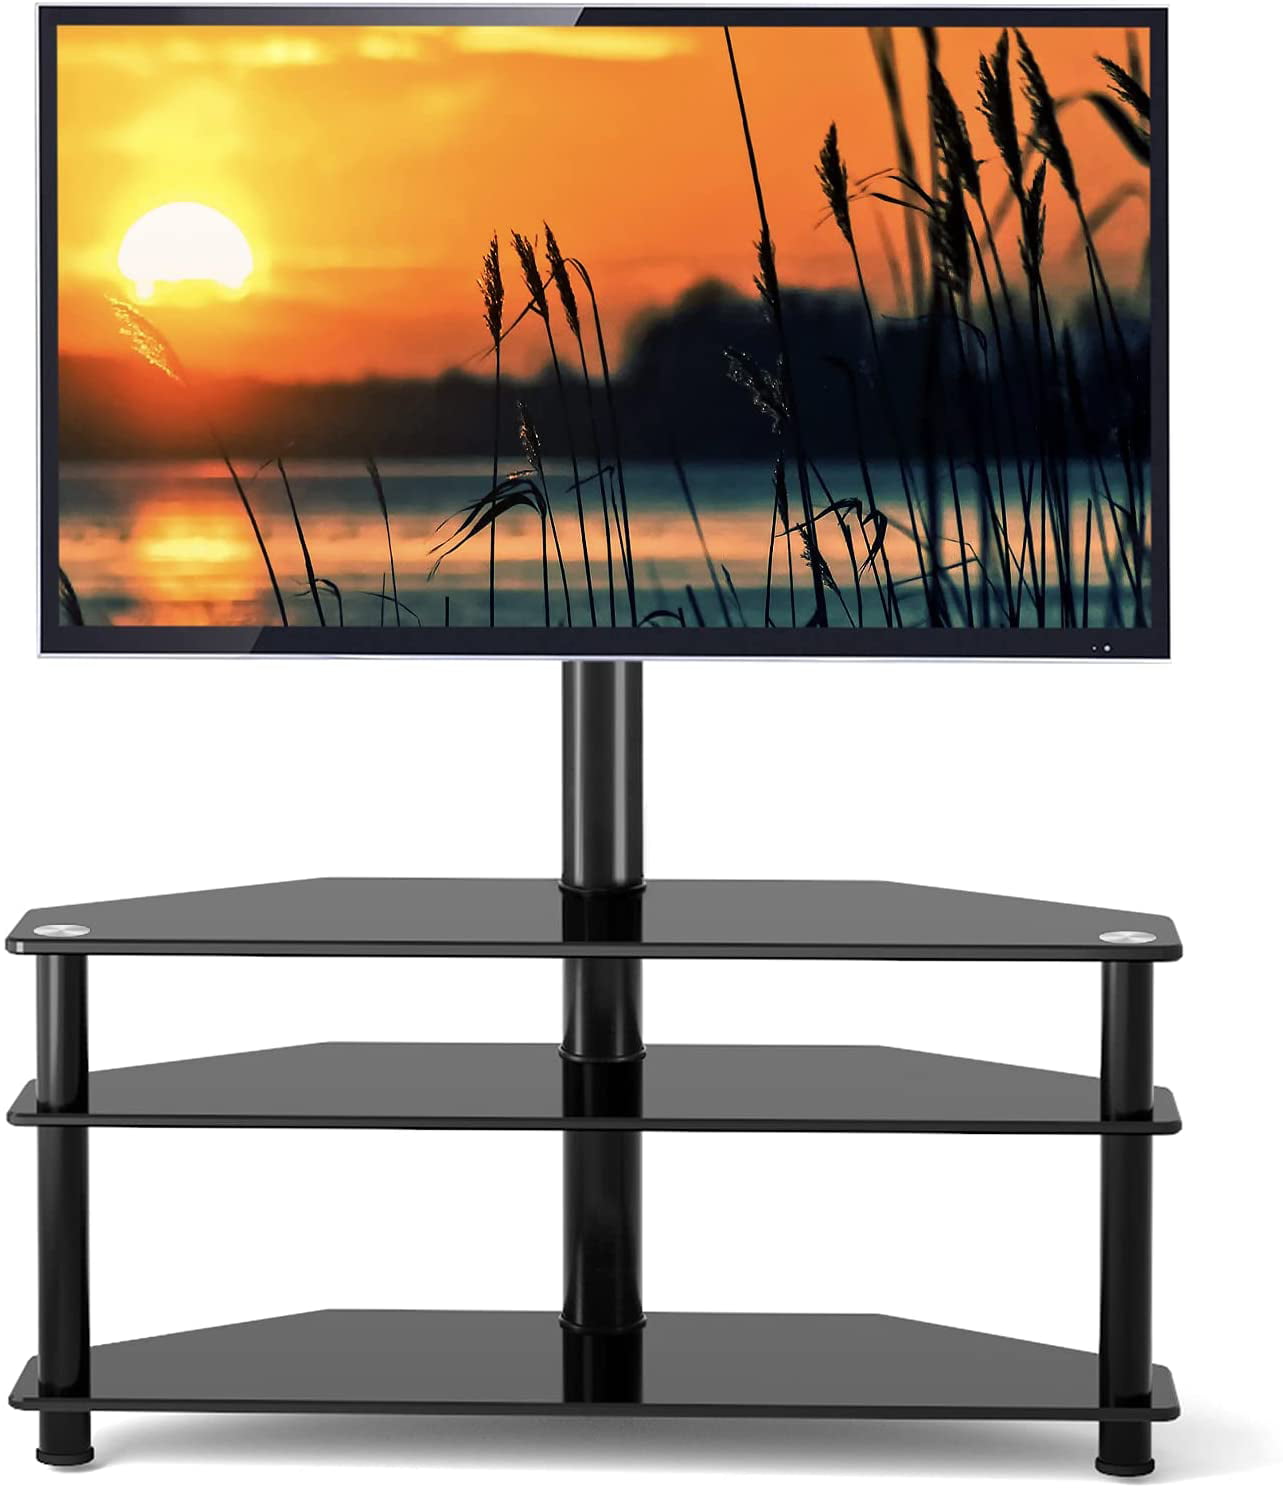 TAVR Swivel Floor TV Stand with Mount 3-in-1 Flat Panel Height Adjustable Glass Entertainment Stand for 32 37 42 47 50 55 60 65 inch Plasma LCD LED QLED Flat/Curved Screen TV 3-Tier Media Stand 